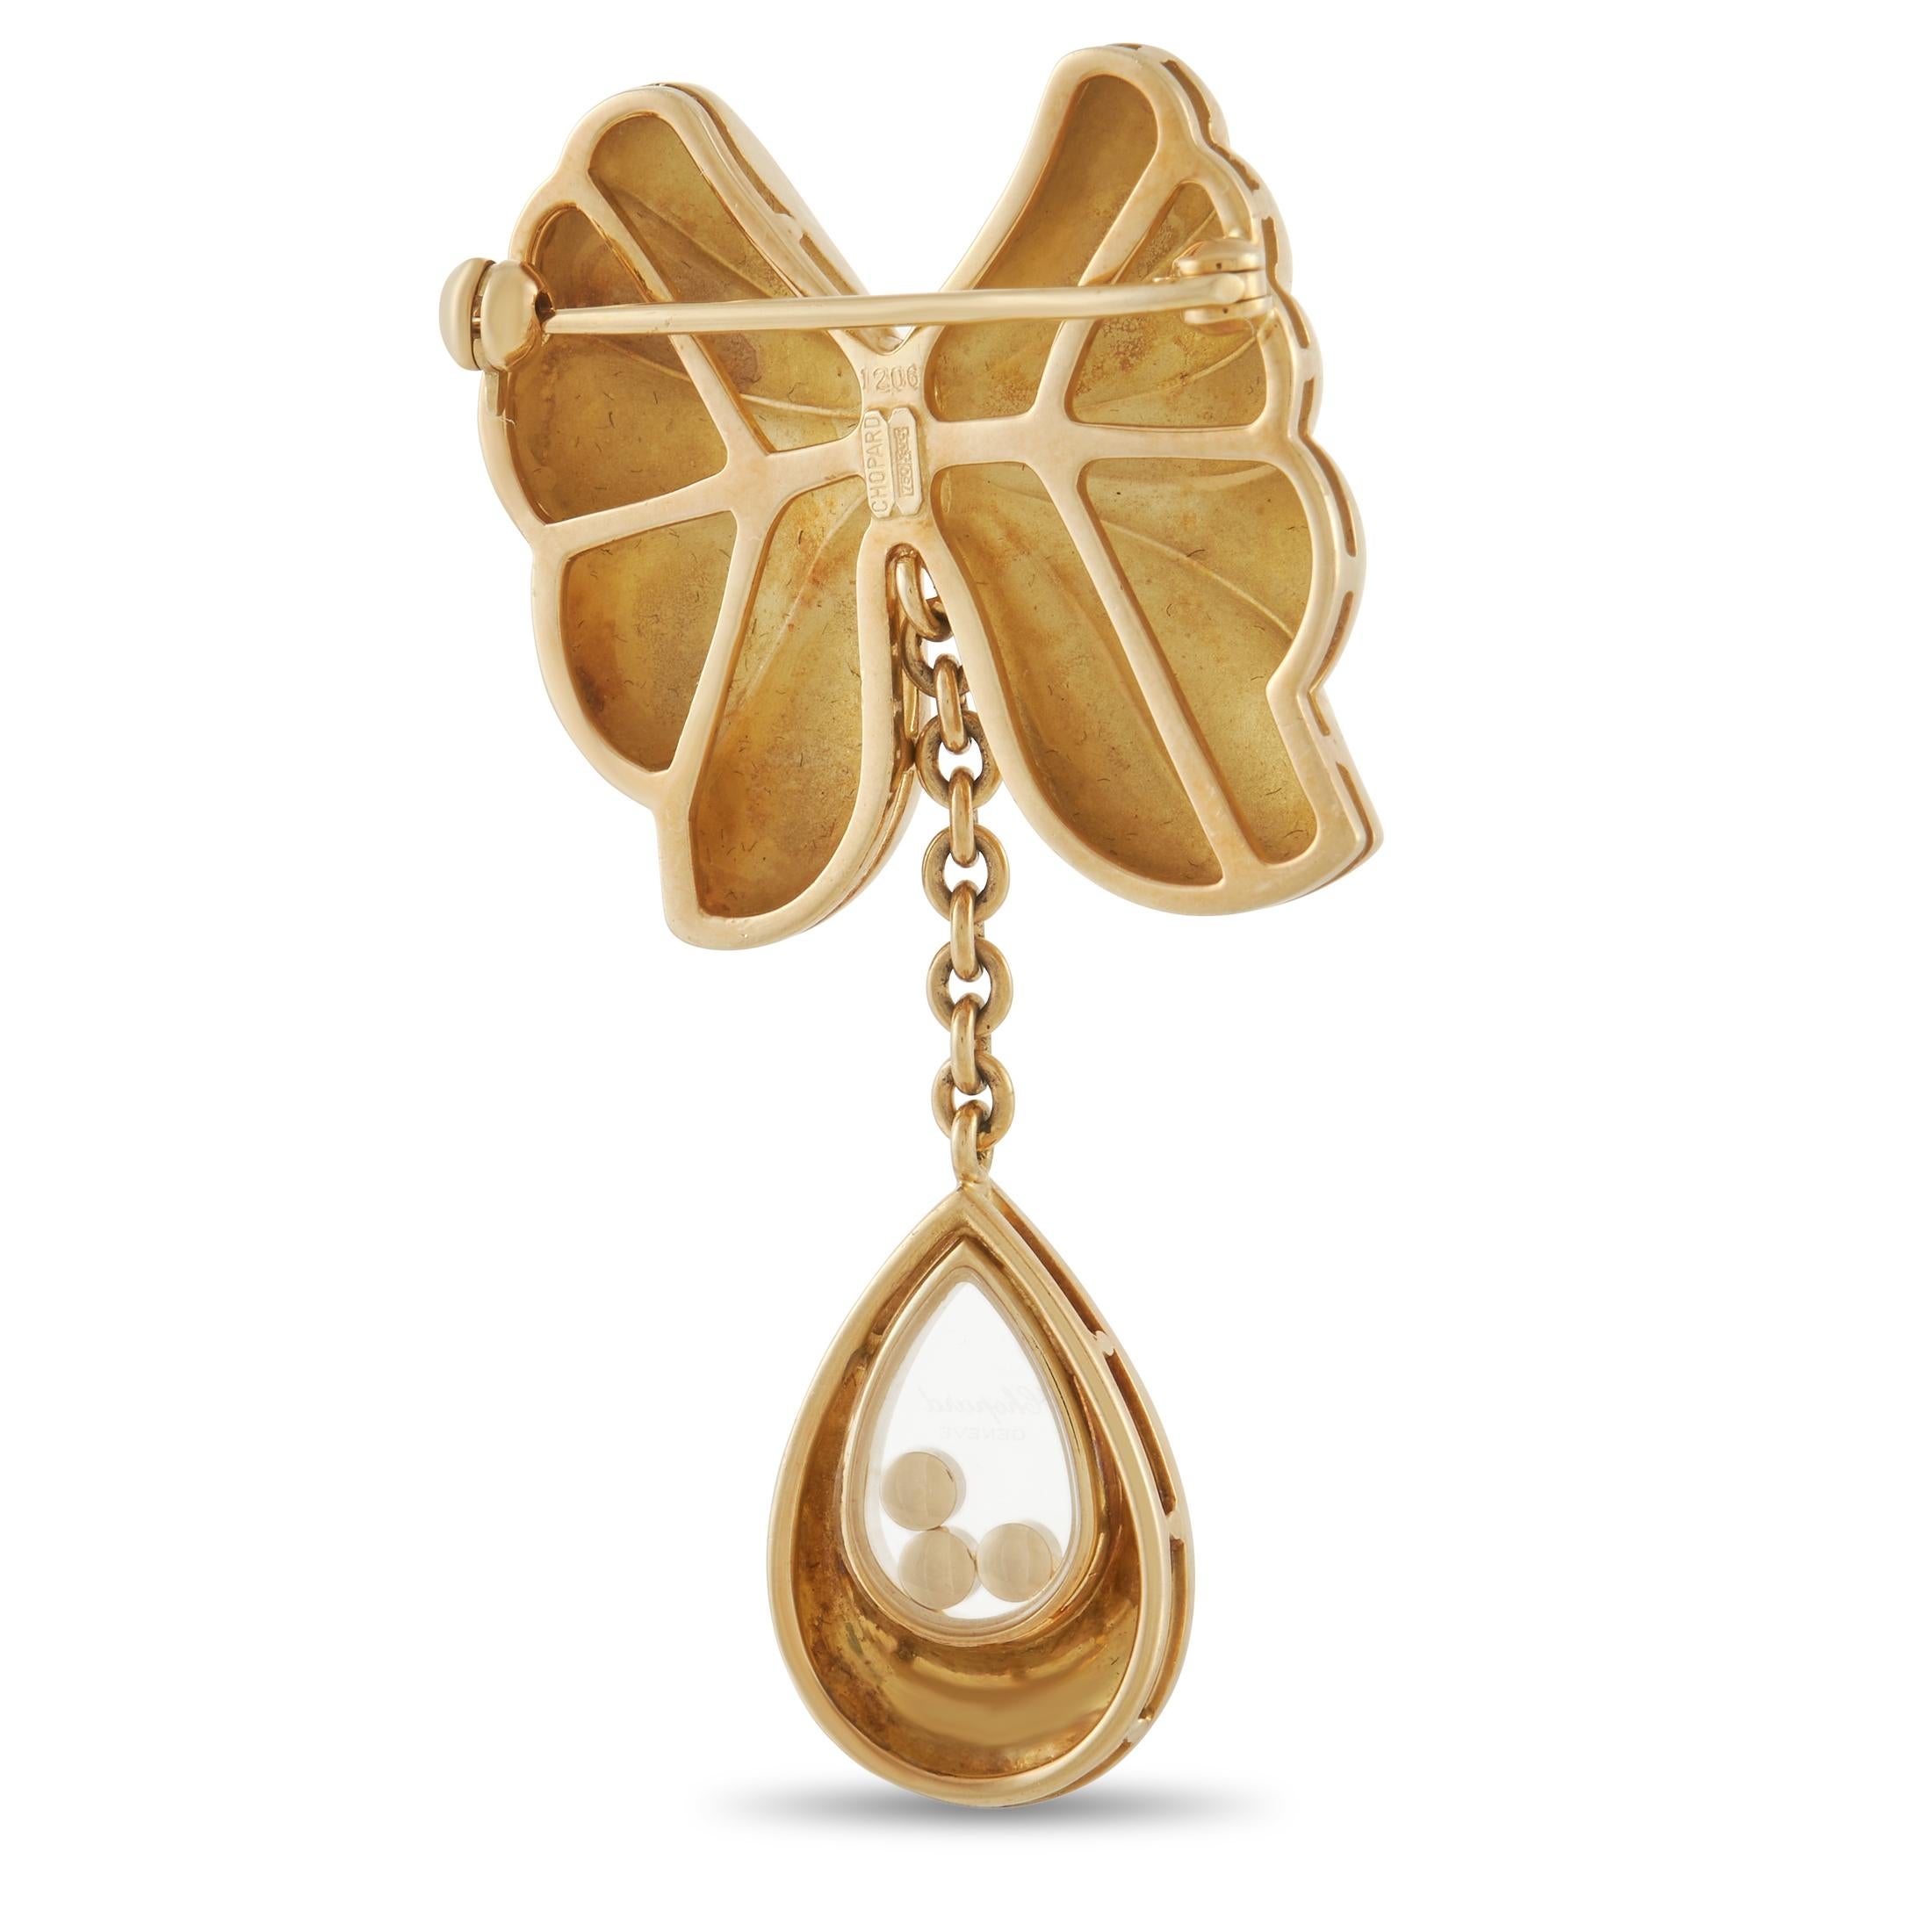 This Vintage Chopard Happy Diamond Brooch is a luxury piece with a certain sense of whimsy. The perfect addition to any jacket lapel, hat, or collar, it features a stunning 18K Yellow Gold bow. Suspended below, you’ll find a transparent